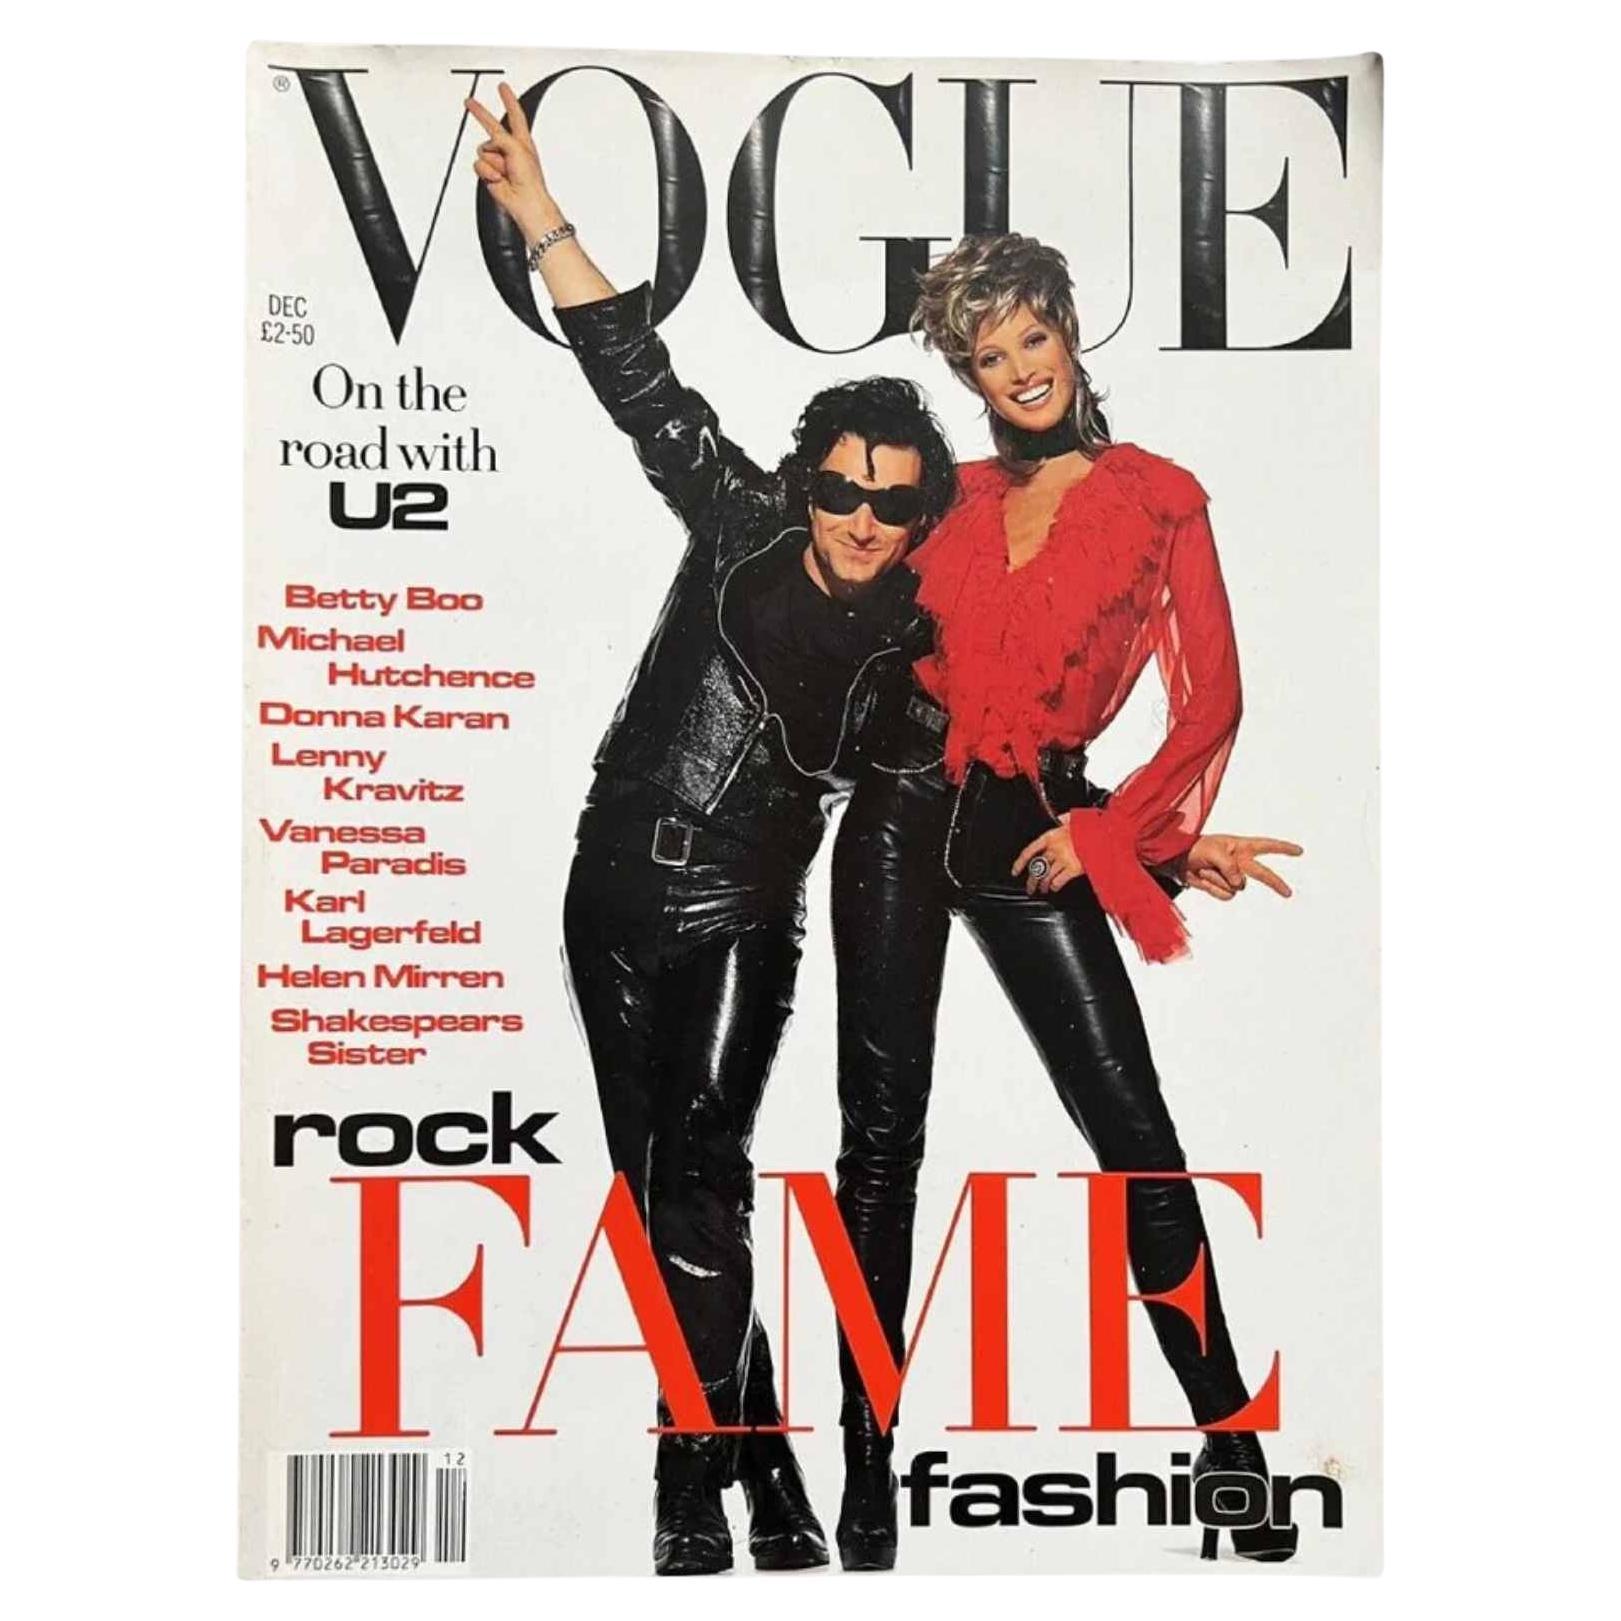 1992 VOGUE Rock Fame Fashion - Cover by Andrew Macpherson